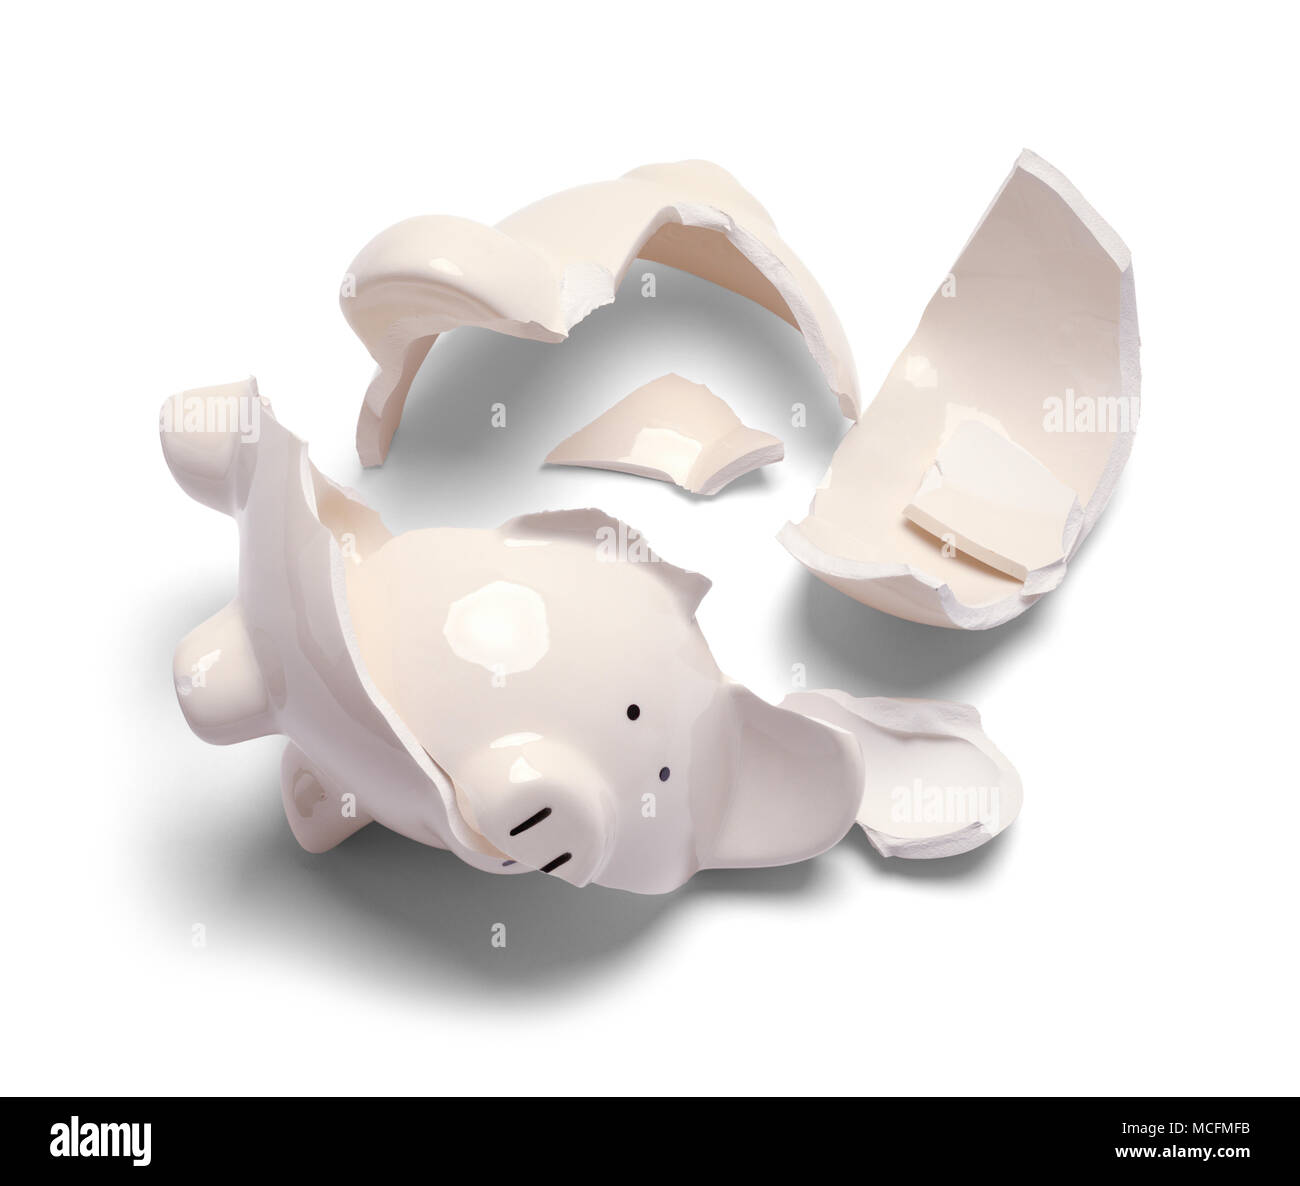 Broken Piggy Bank Isolated on a White Background. Stock Photo